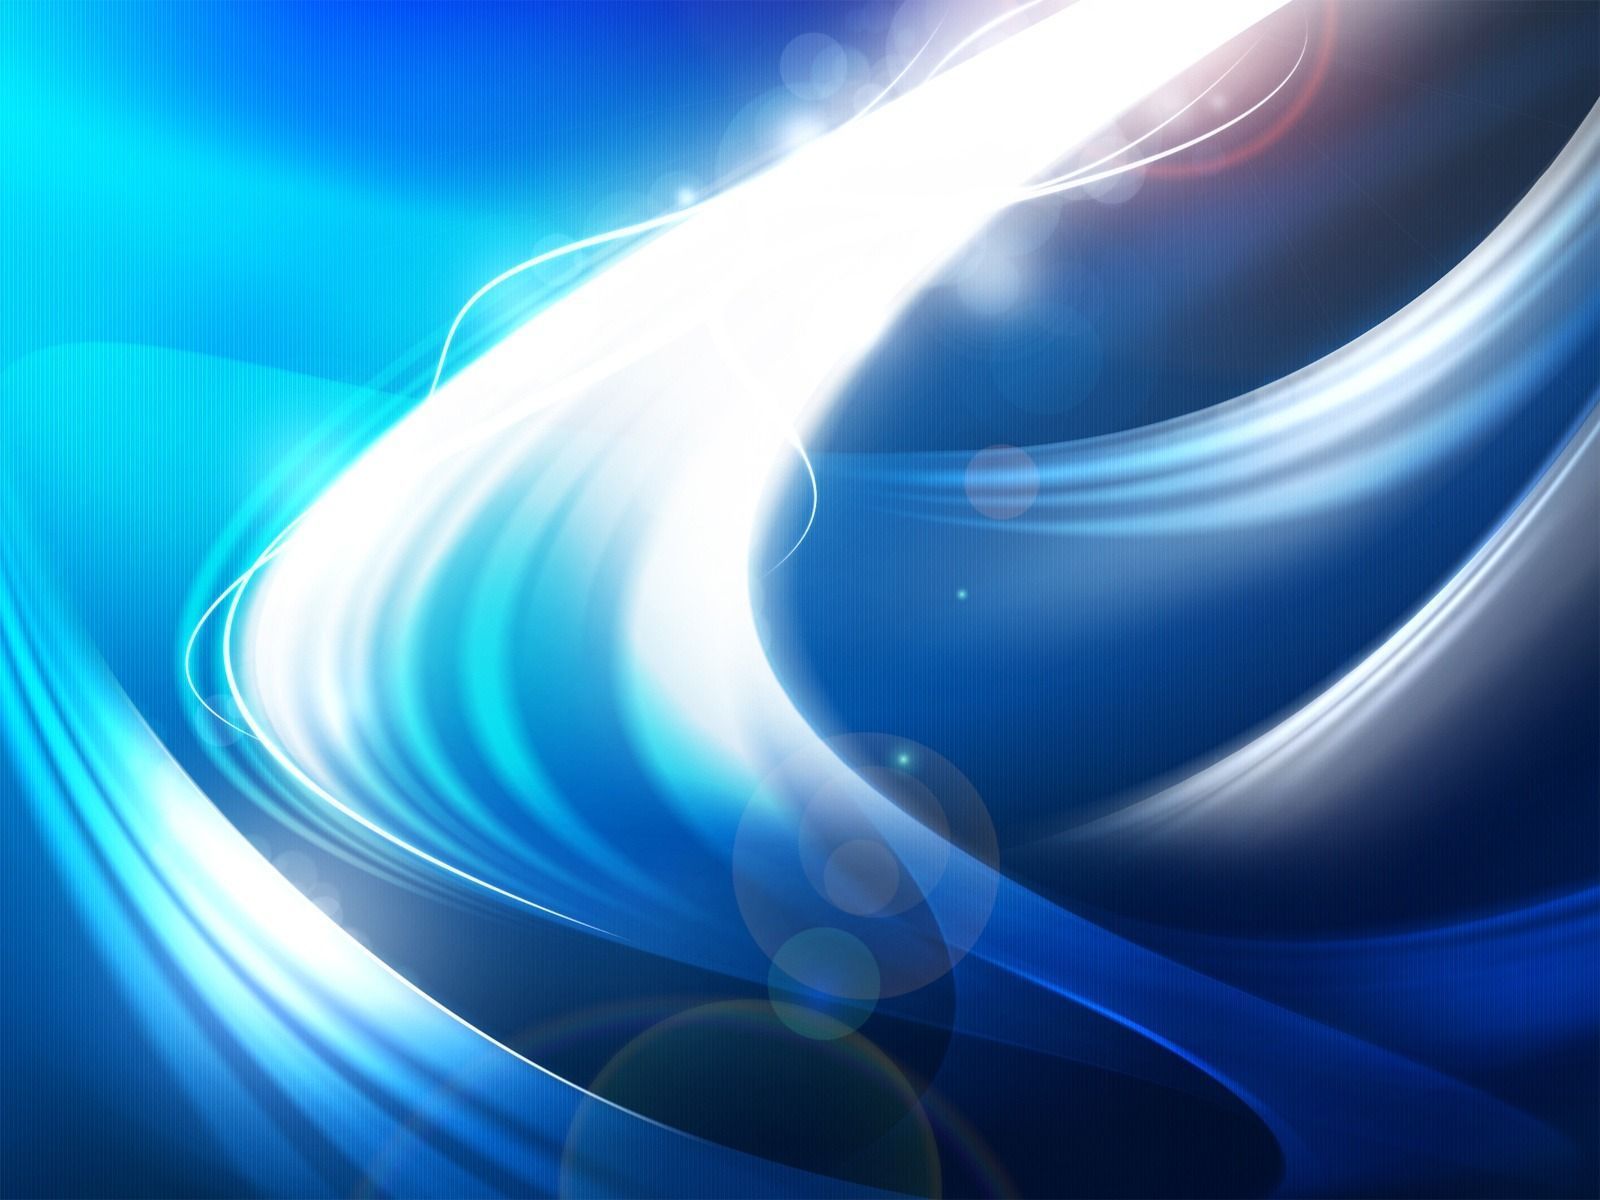 Download Light Abstract Wallpaper For Android w8 Mbuh.xyz